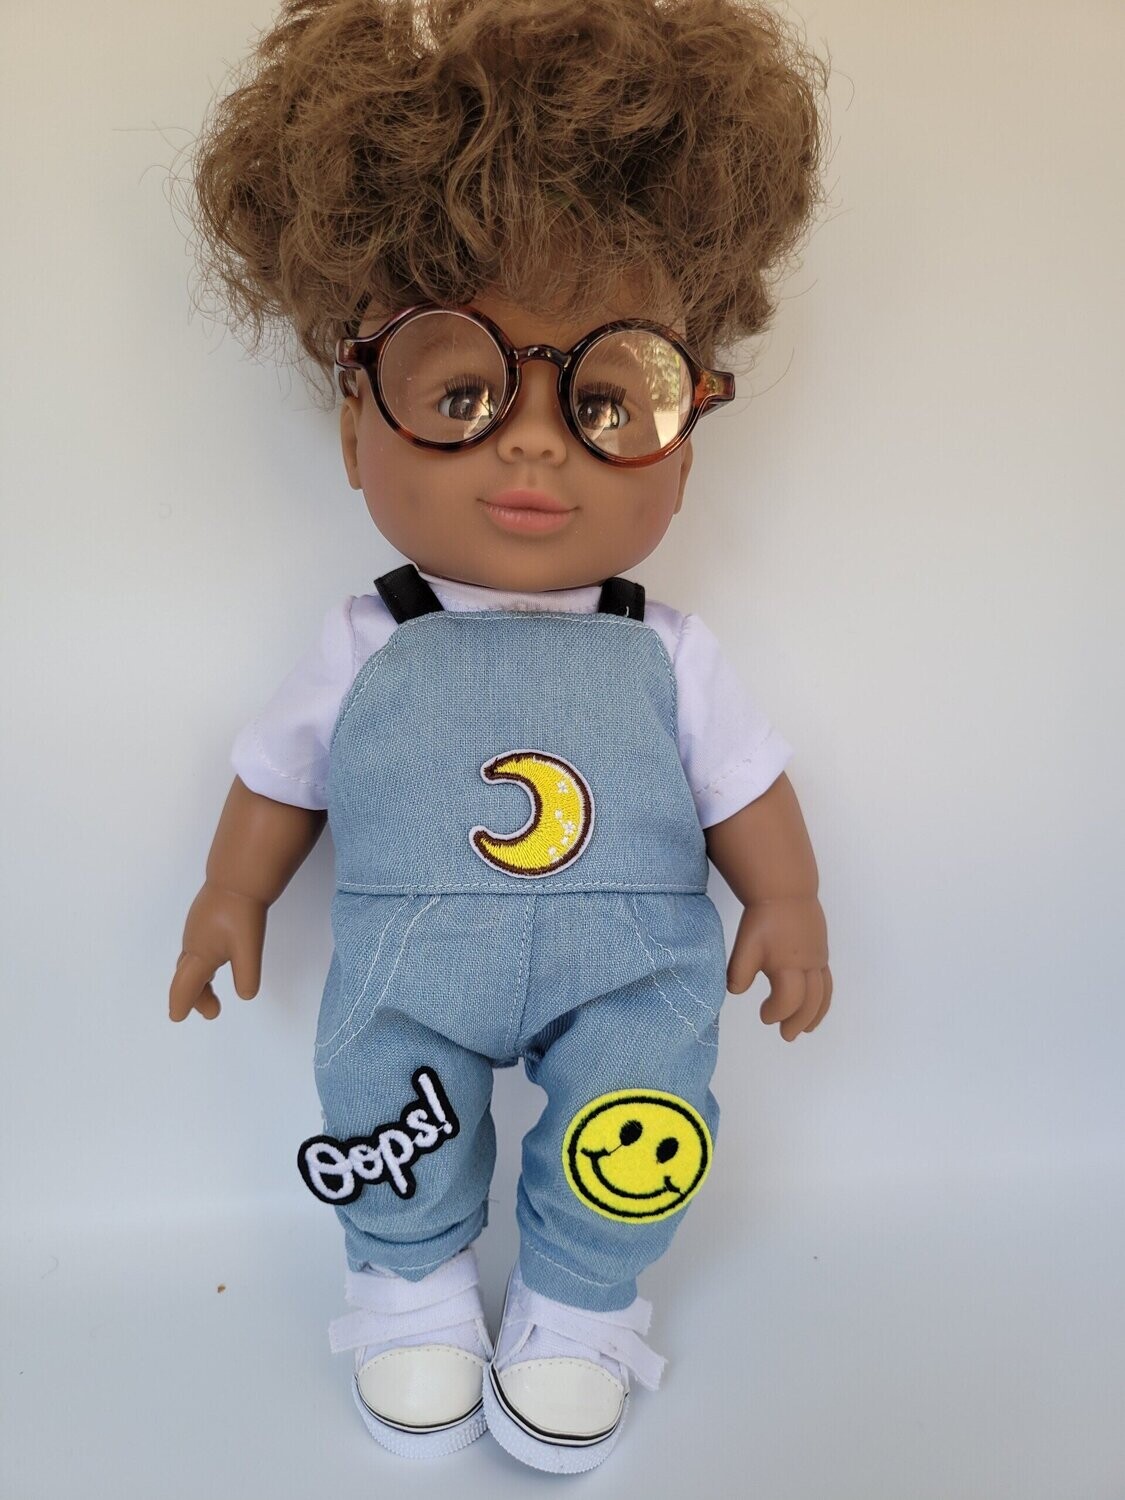 mixed race Simeon wearing Dungarees plus glasses